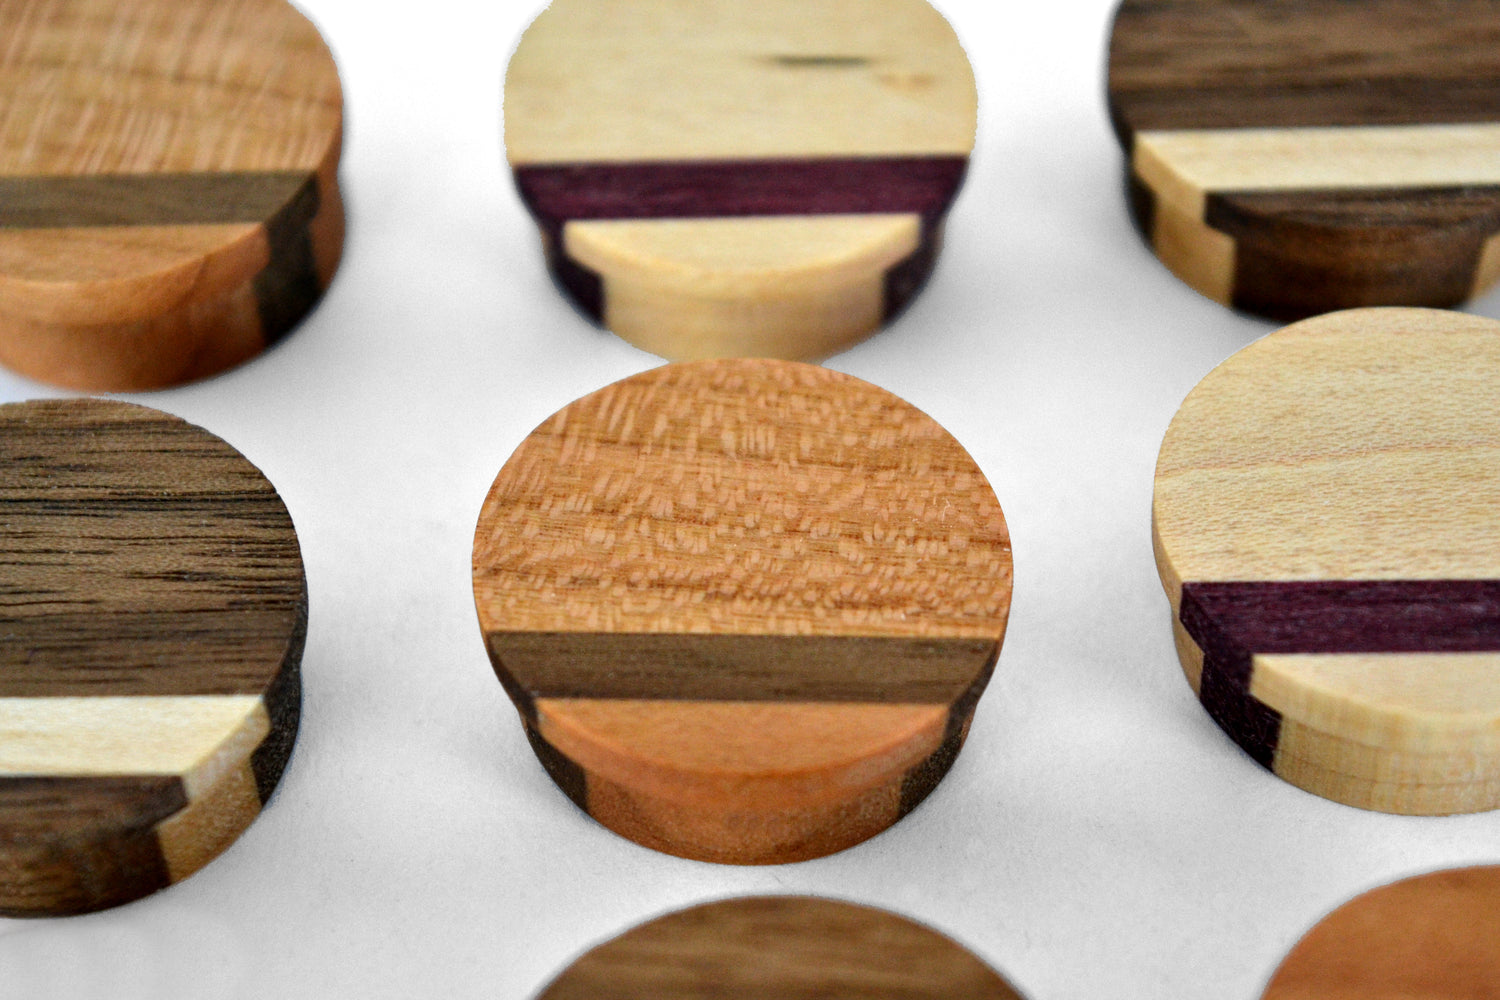 quarter sawn cherry wood magnet with flecks, part of a set of assorted colorful wood magnets for the kitchen